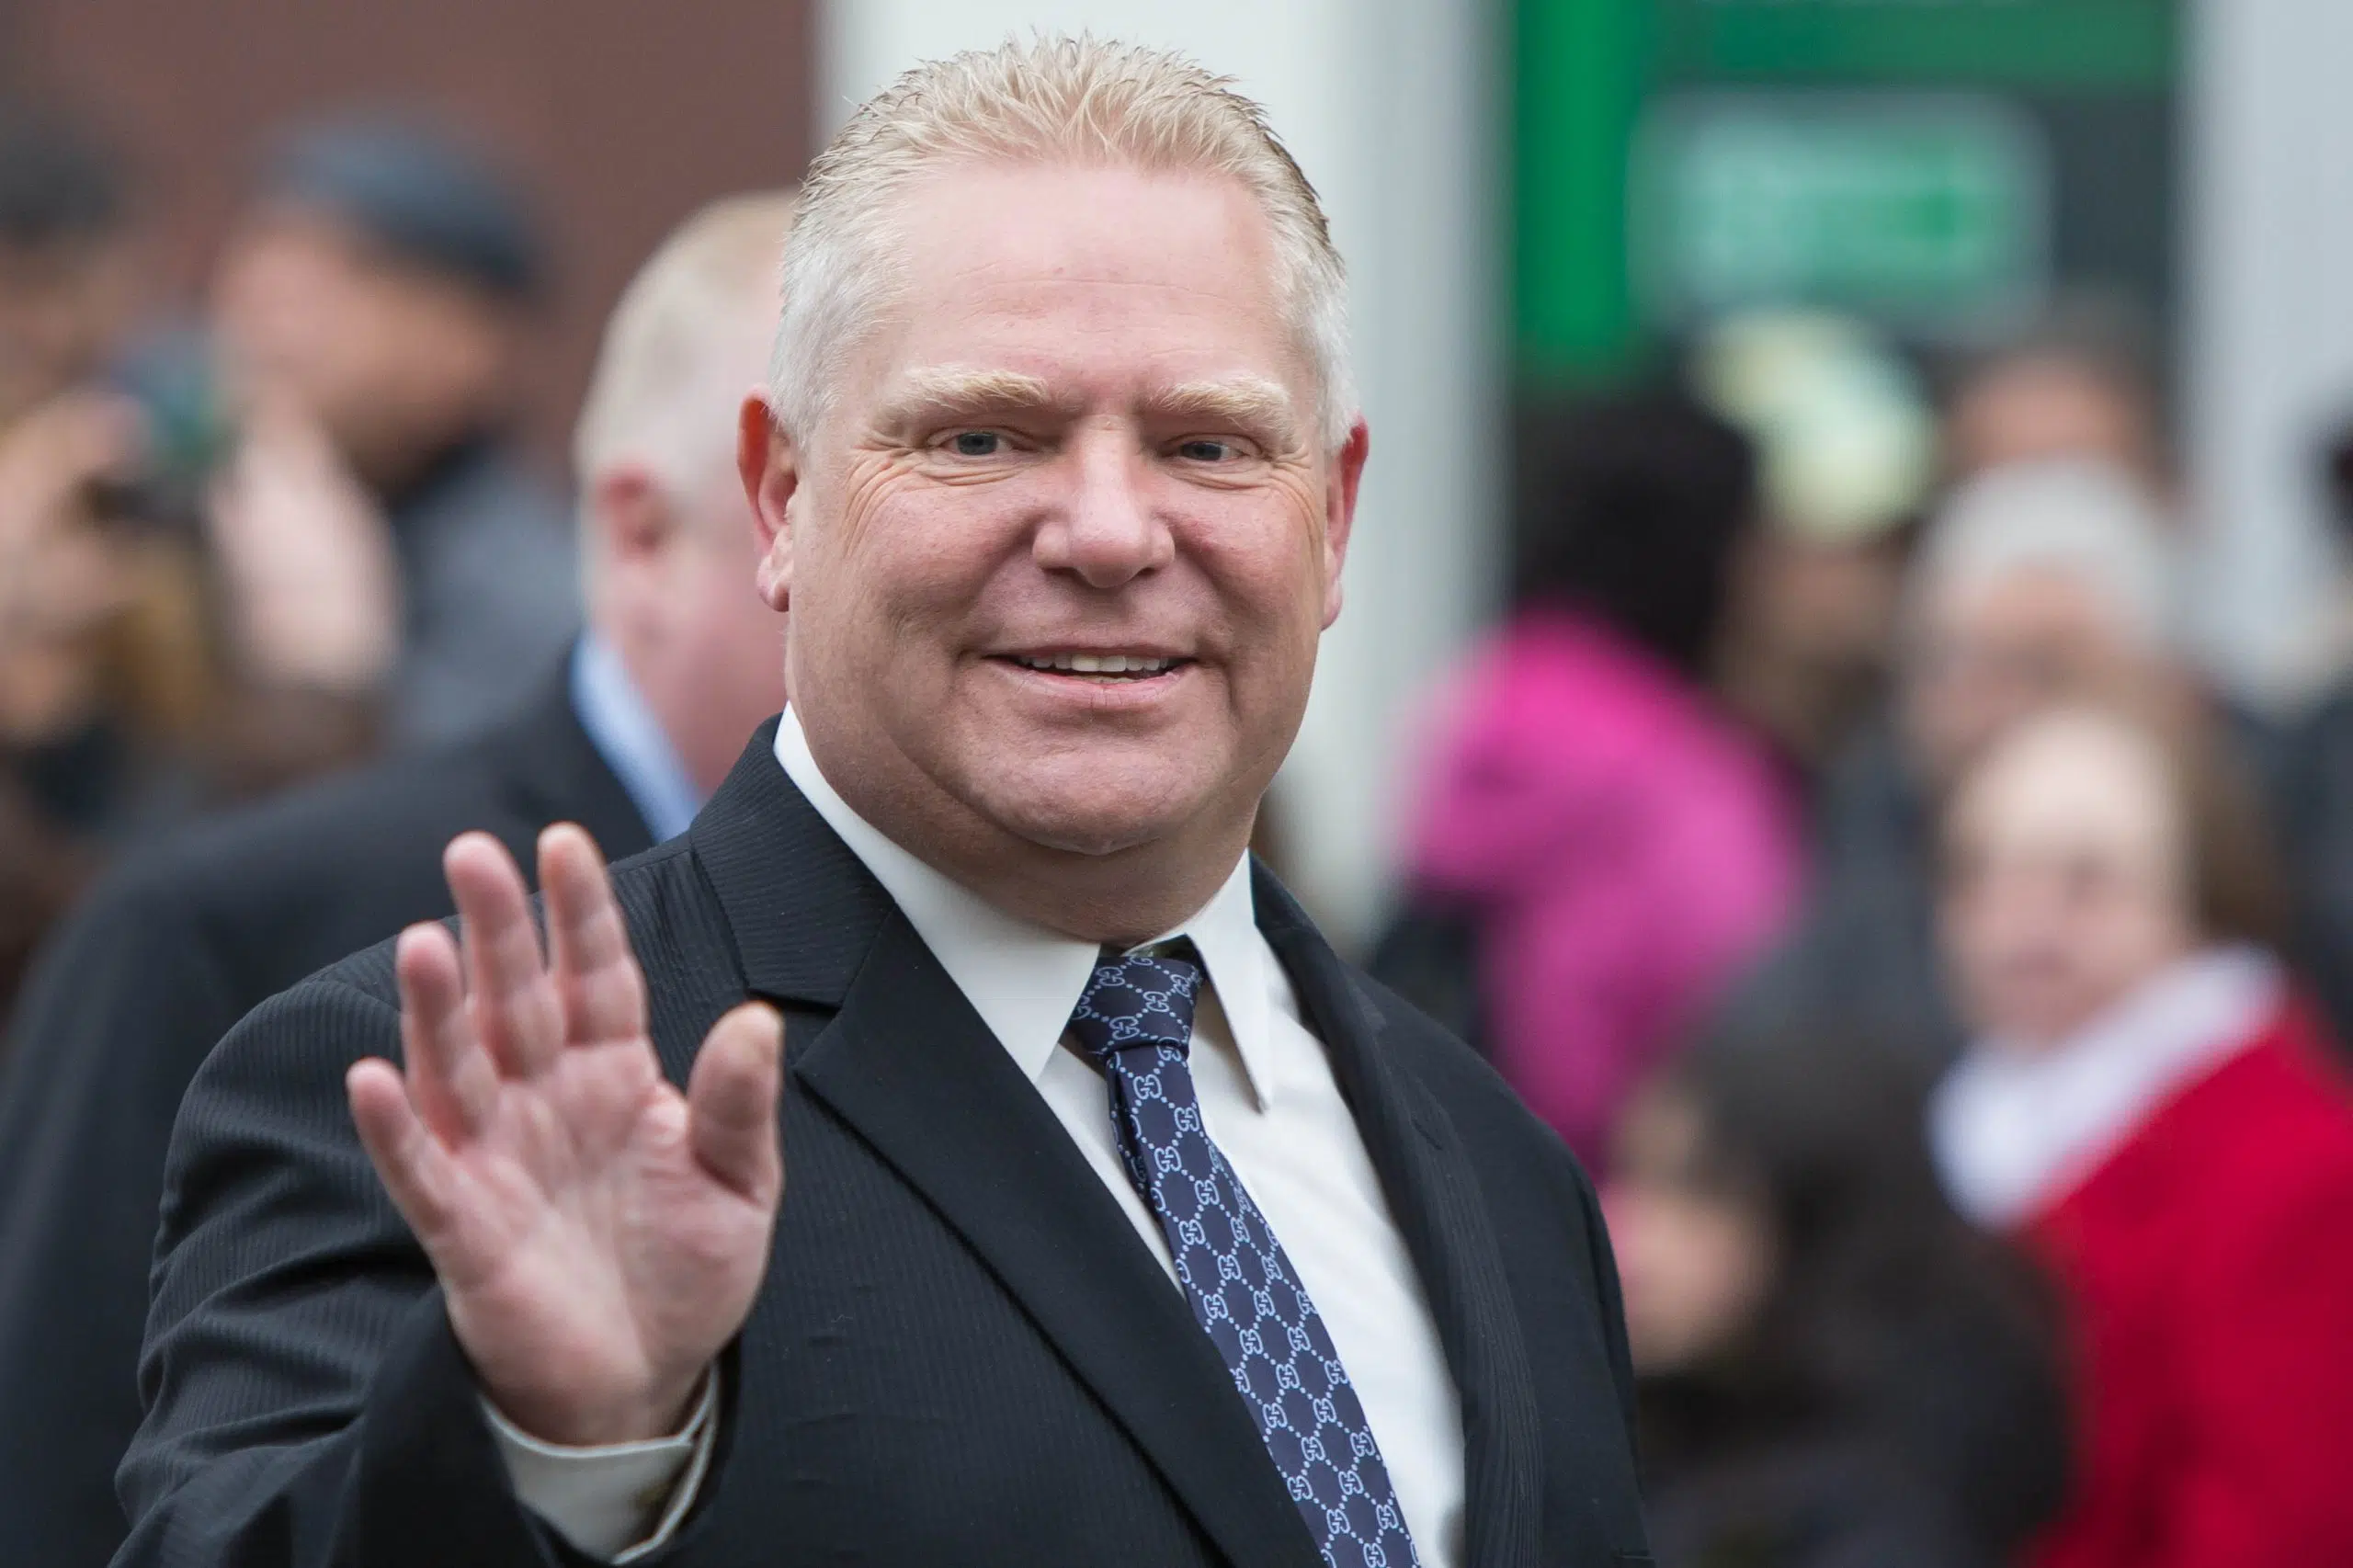 Expert says Doug Ford invoking the notwithstanding clause exposes a constitution flaw